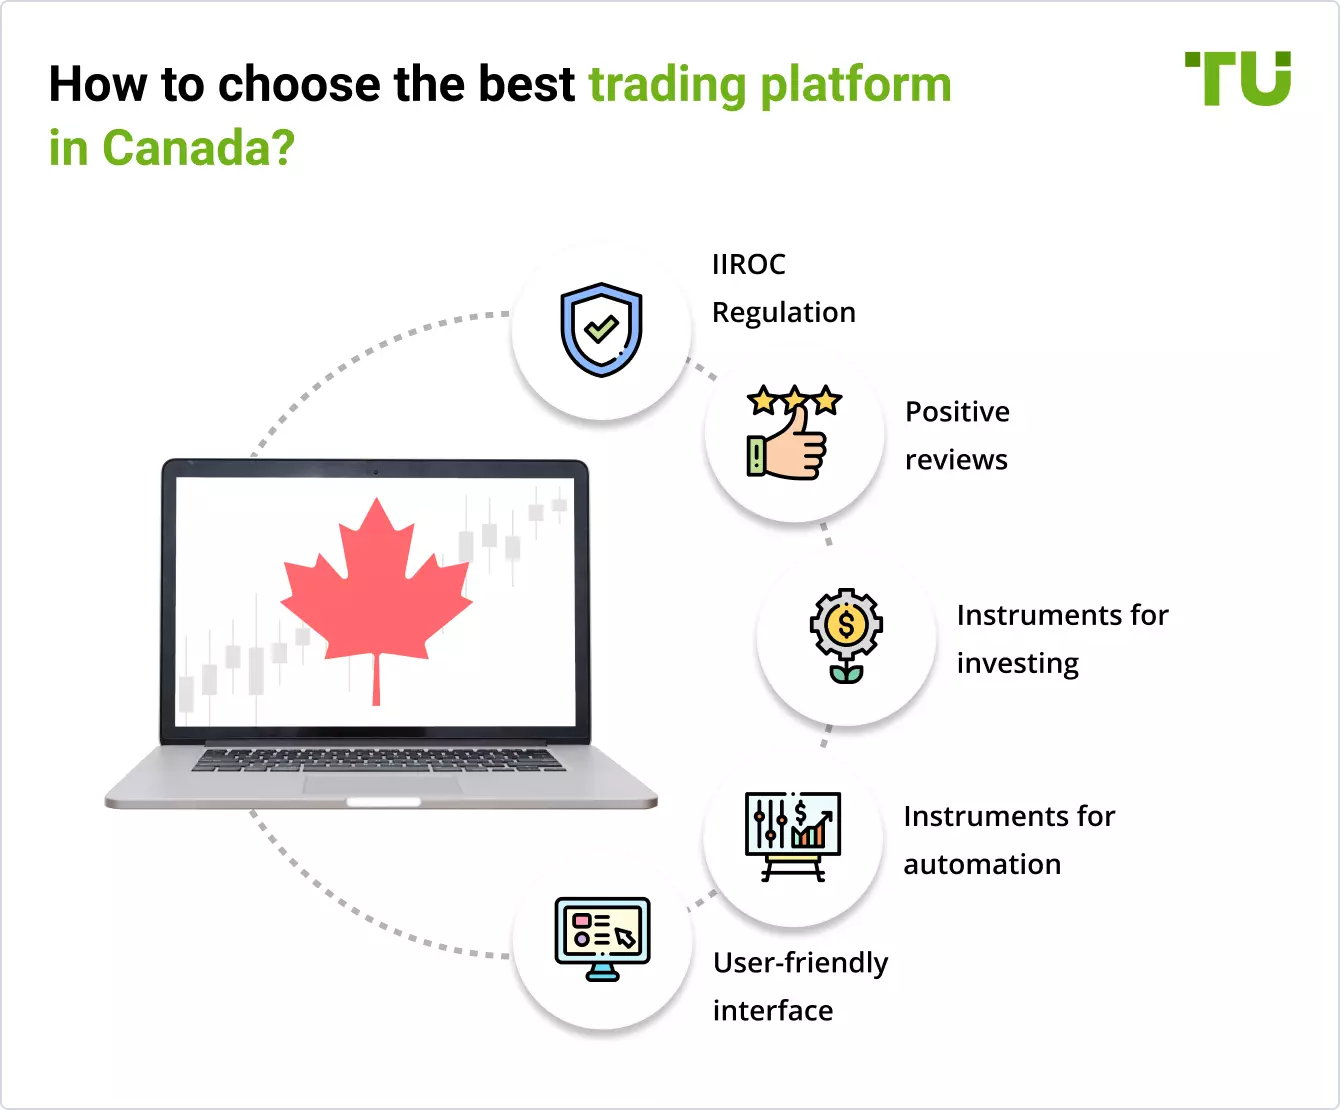 How to choose the best trading platform in Canada?